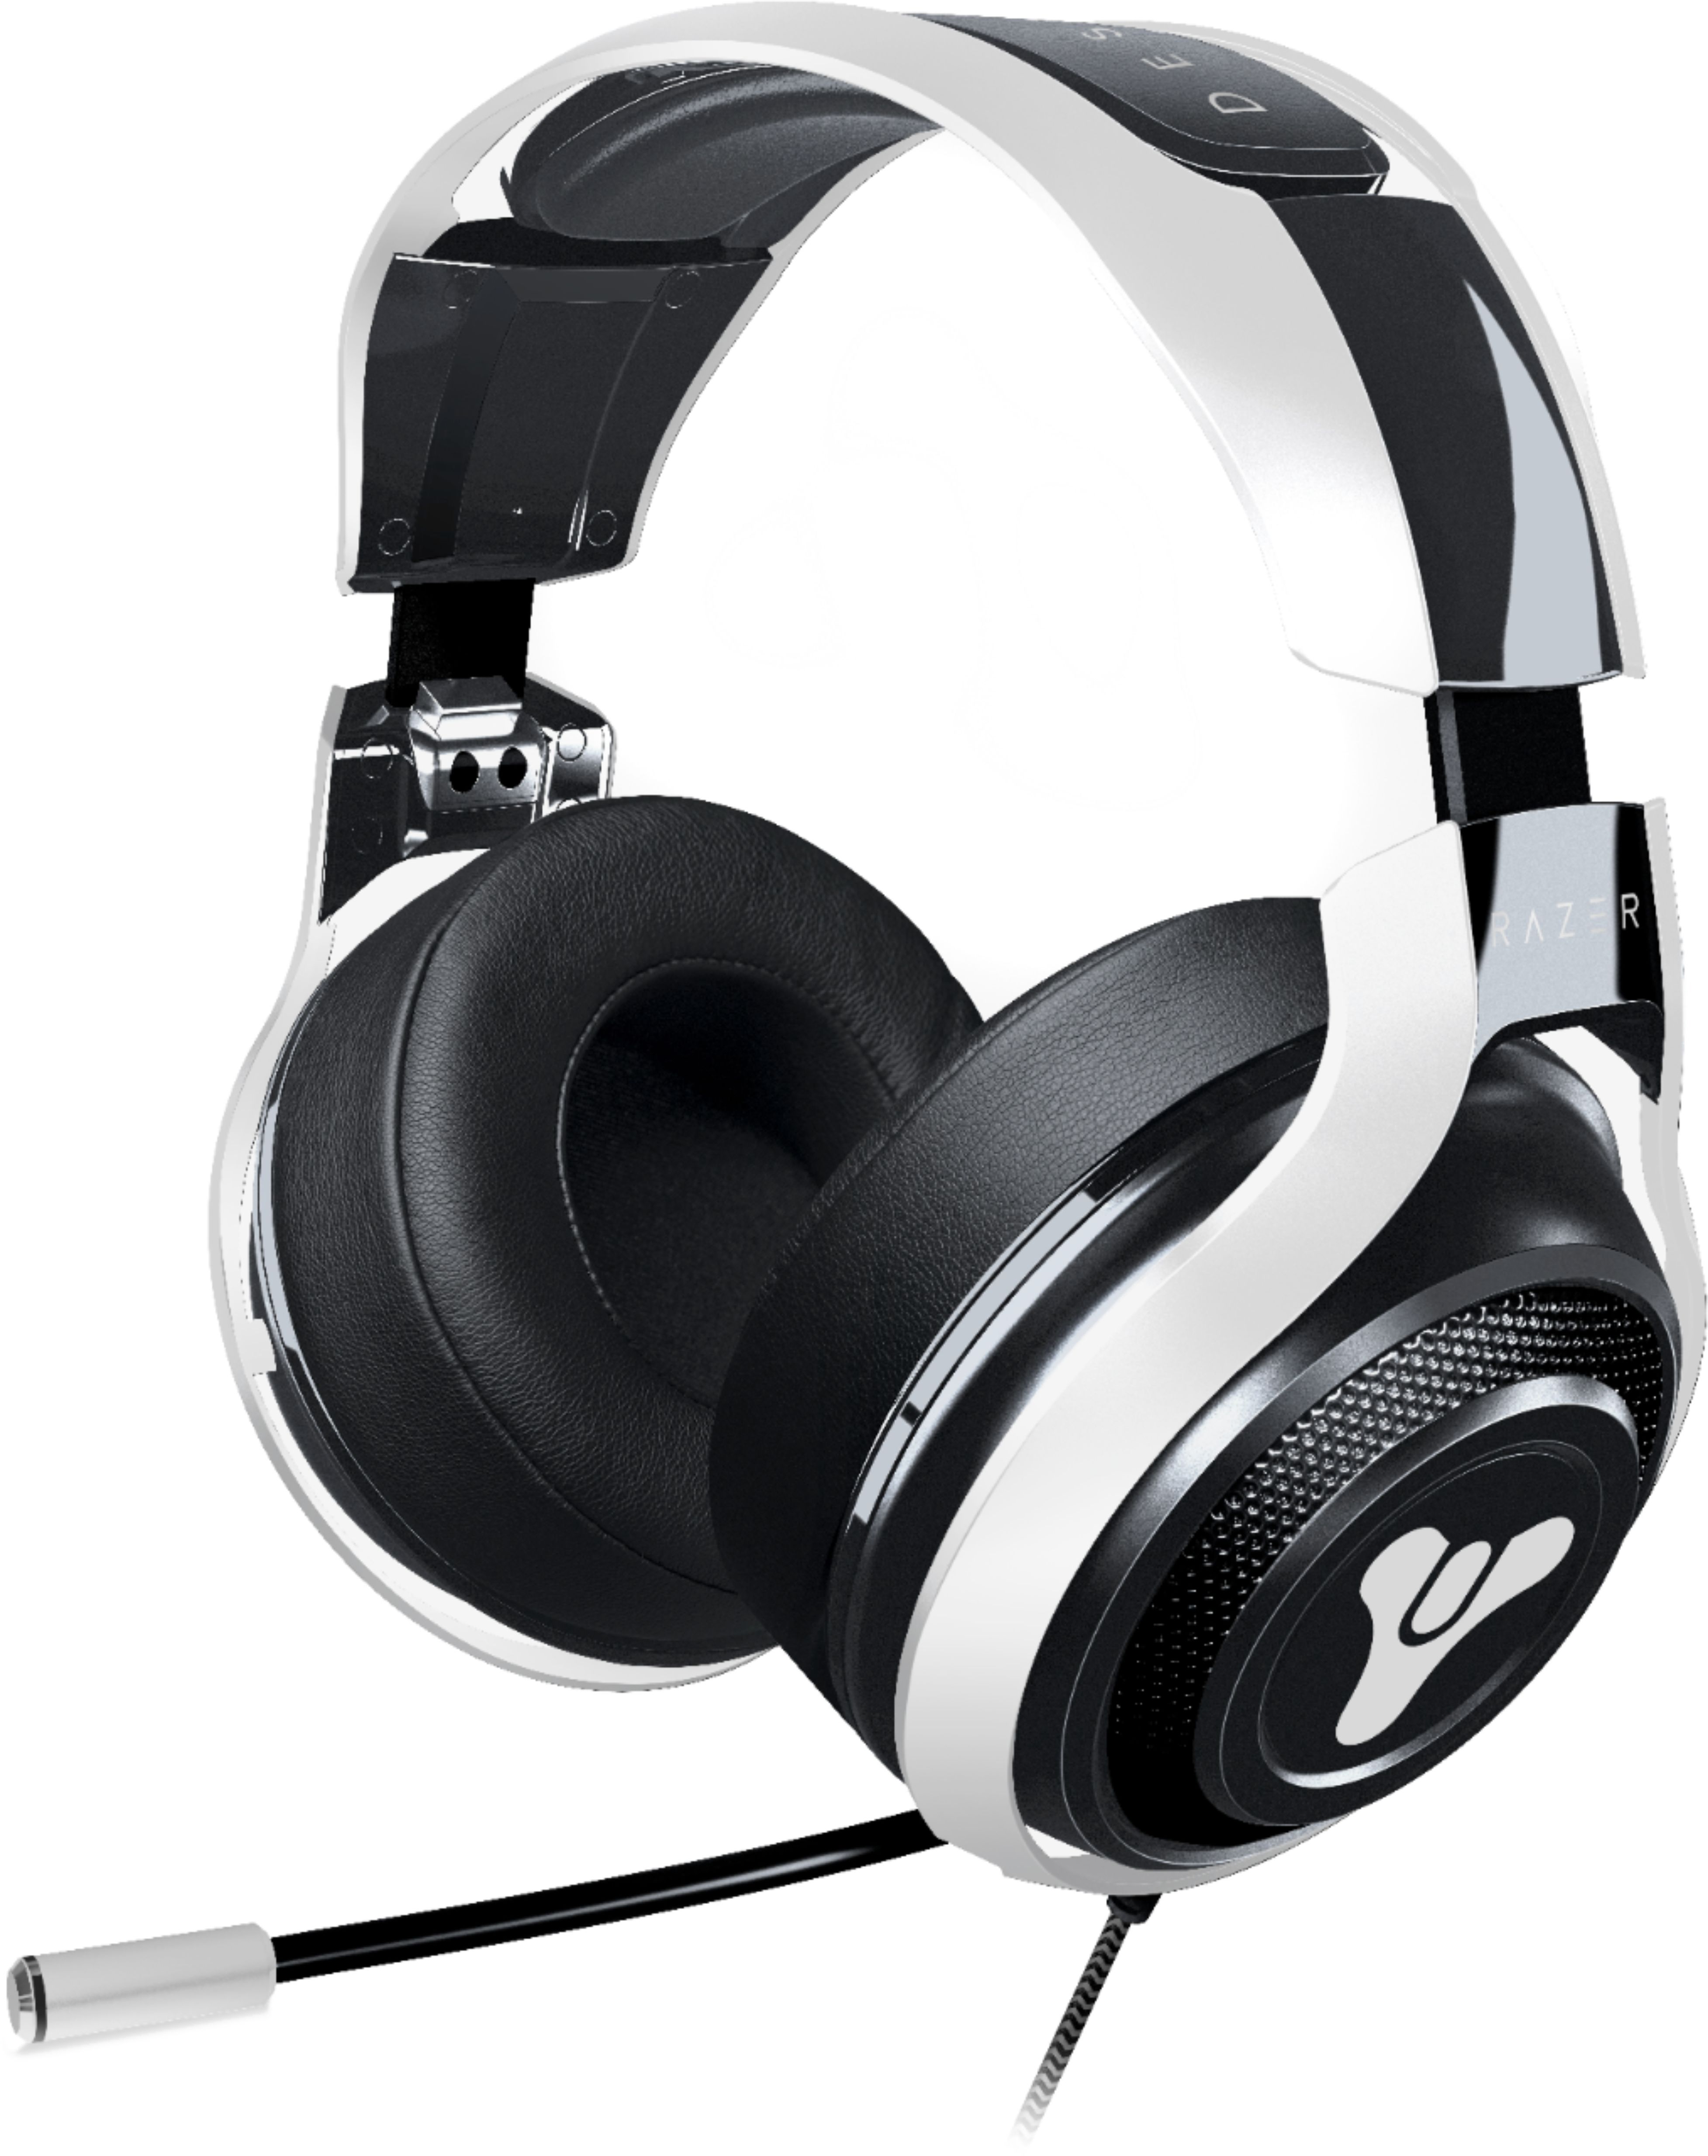 Minimalist Best Gaming Headset Pc Best Buy for Small Room